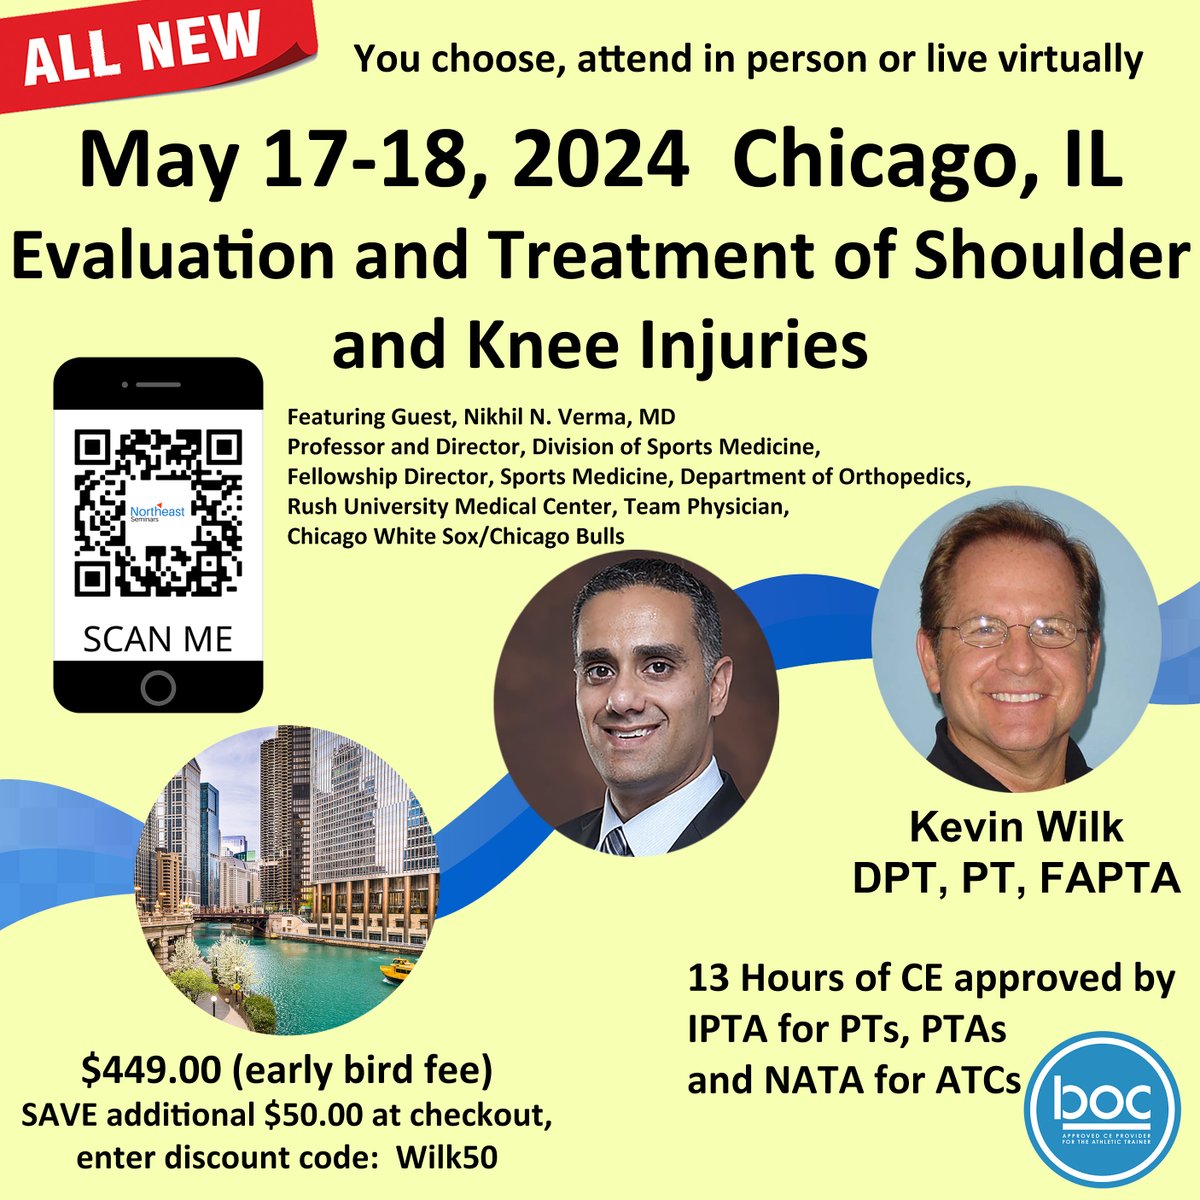 Join Kevin Wilk with special guest Nikhil Varma, MD, for Evaluation and Treatment of Shoulder and Knee Injuries. May 17-18, Chicago, IL Live and virtual options! Register via QR code or link below! neseminars.com/product/evalua…